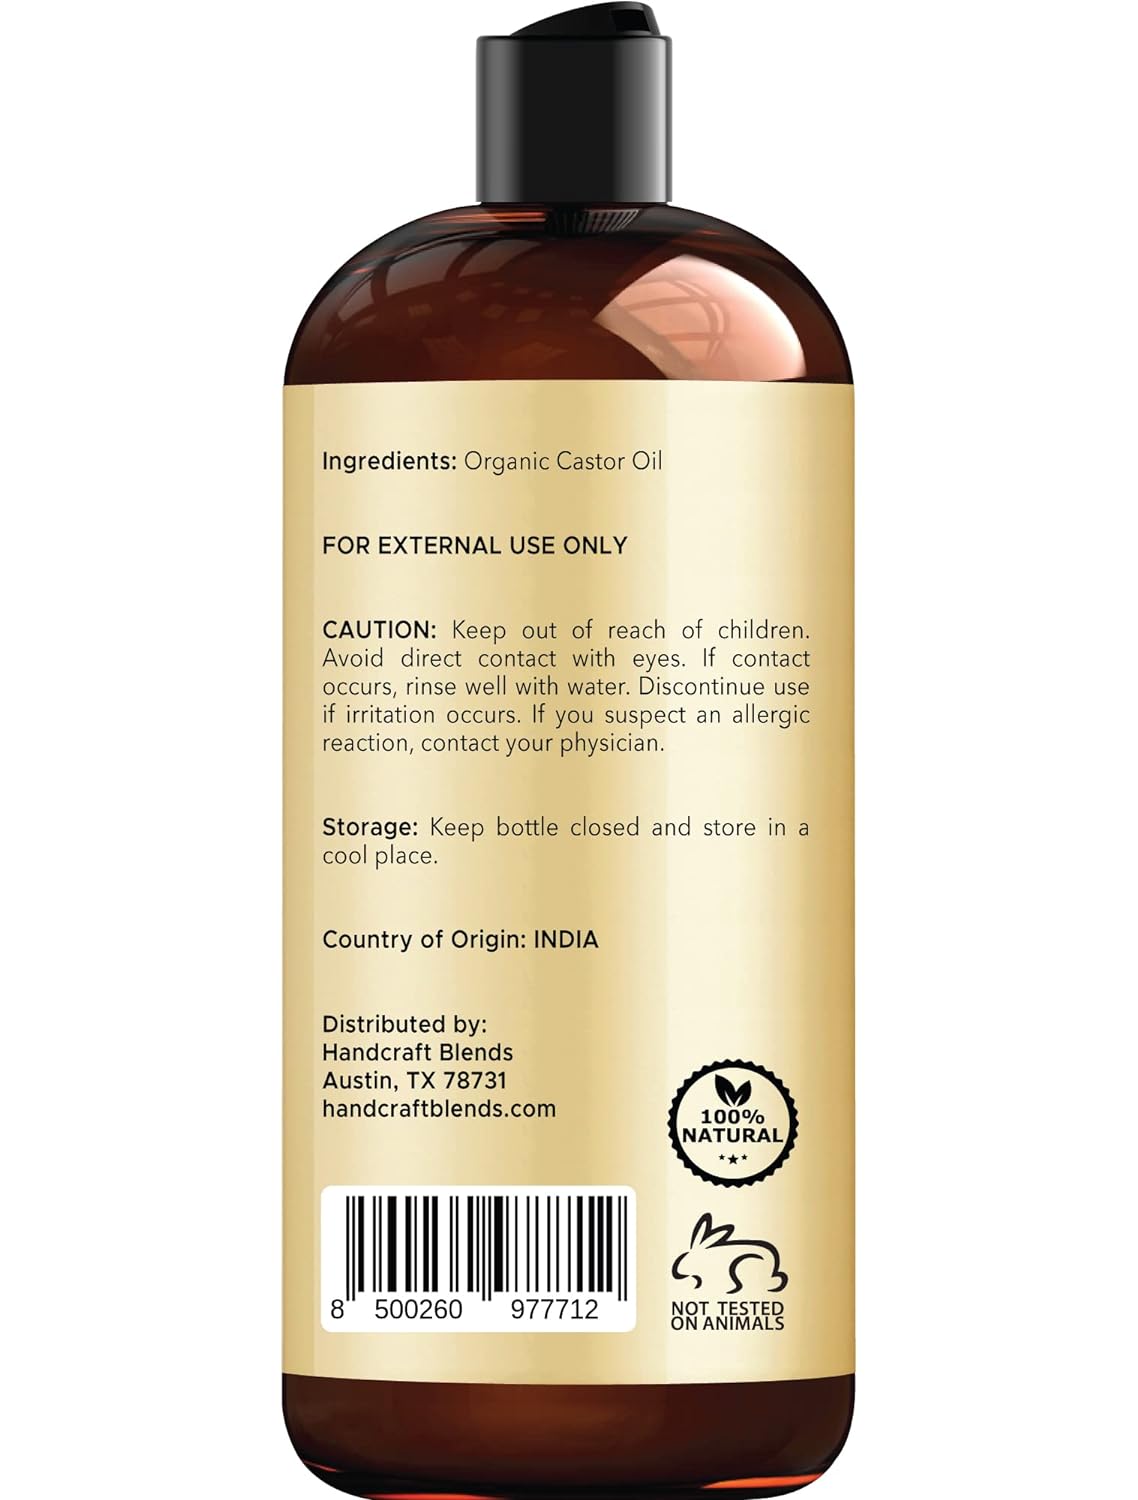 Handcraft Blends Castor Oil with Rosemary Oil for Hair Growth, Eyelashes, Eyebrows - 100% Pure and Natural Carrier Oil Hair, Body Oil - Moisturizing Massage Oil for Aromatherapy - 8 fl. Oz - EVERRD USA